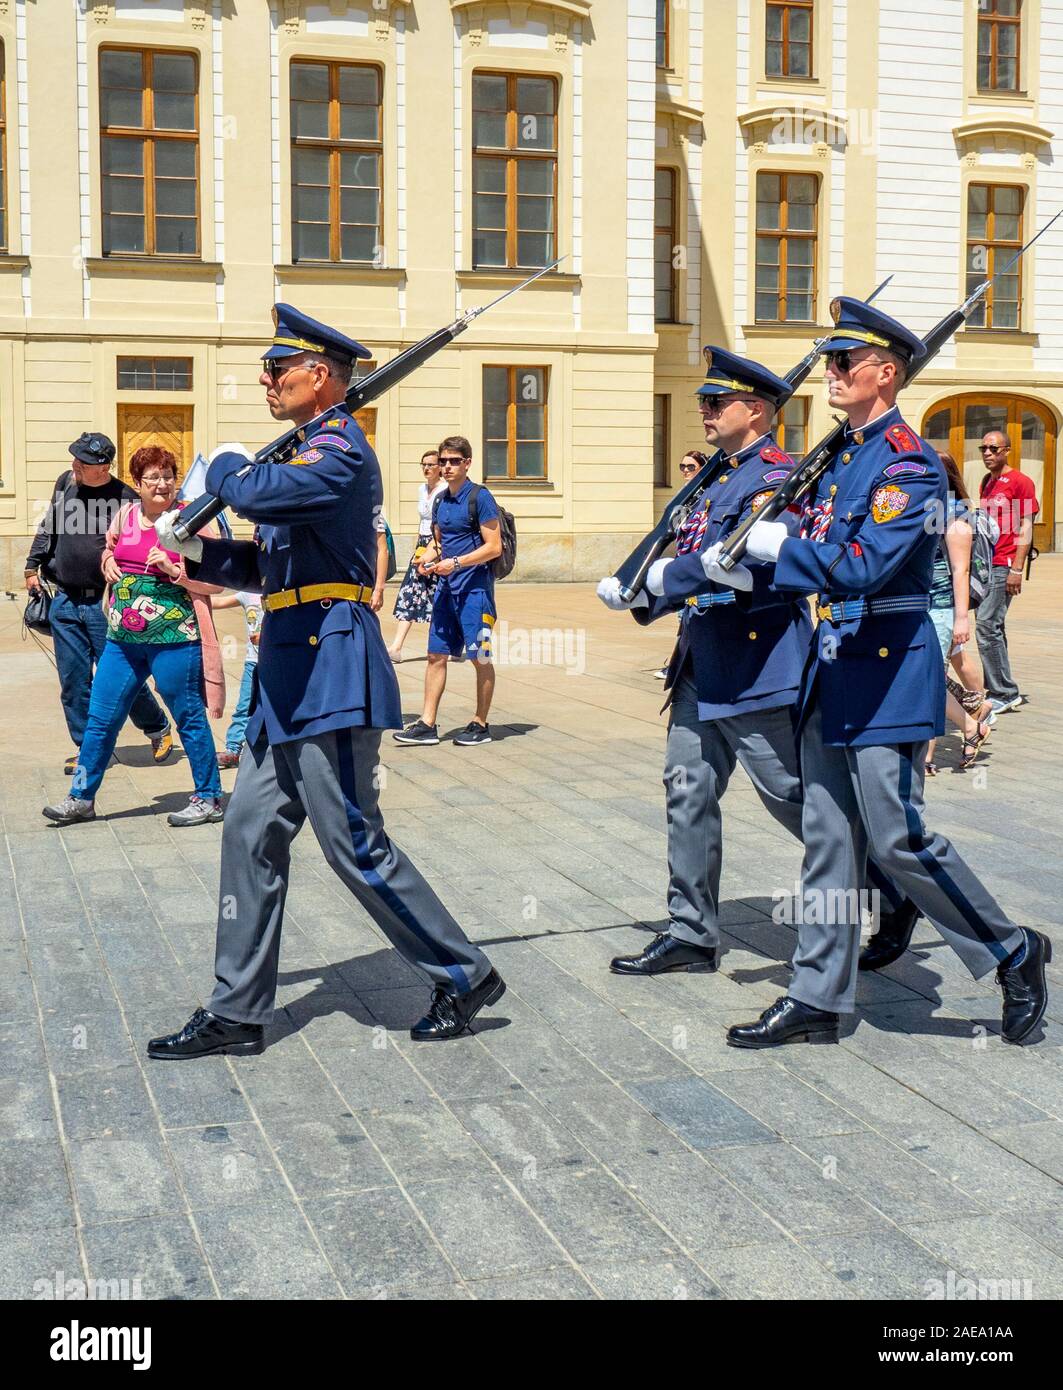 Prague Castle Guards marching during the changing of the guards ceremony at the Giants' Gate First Courtyard Prague Castle Prague Czech Republic. Stock Photo